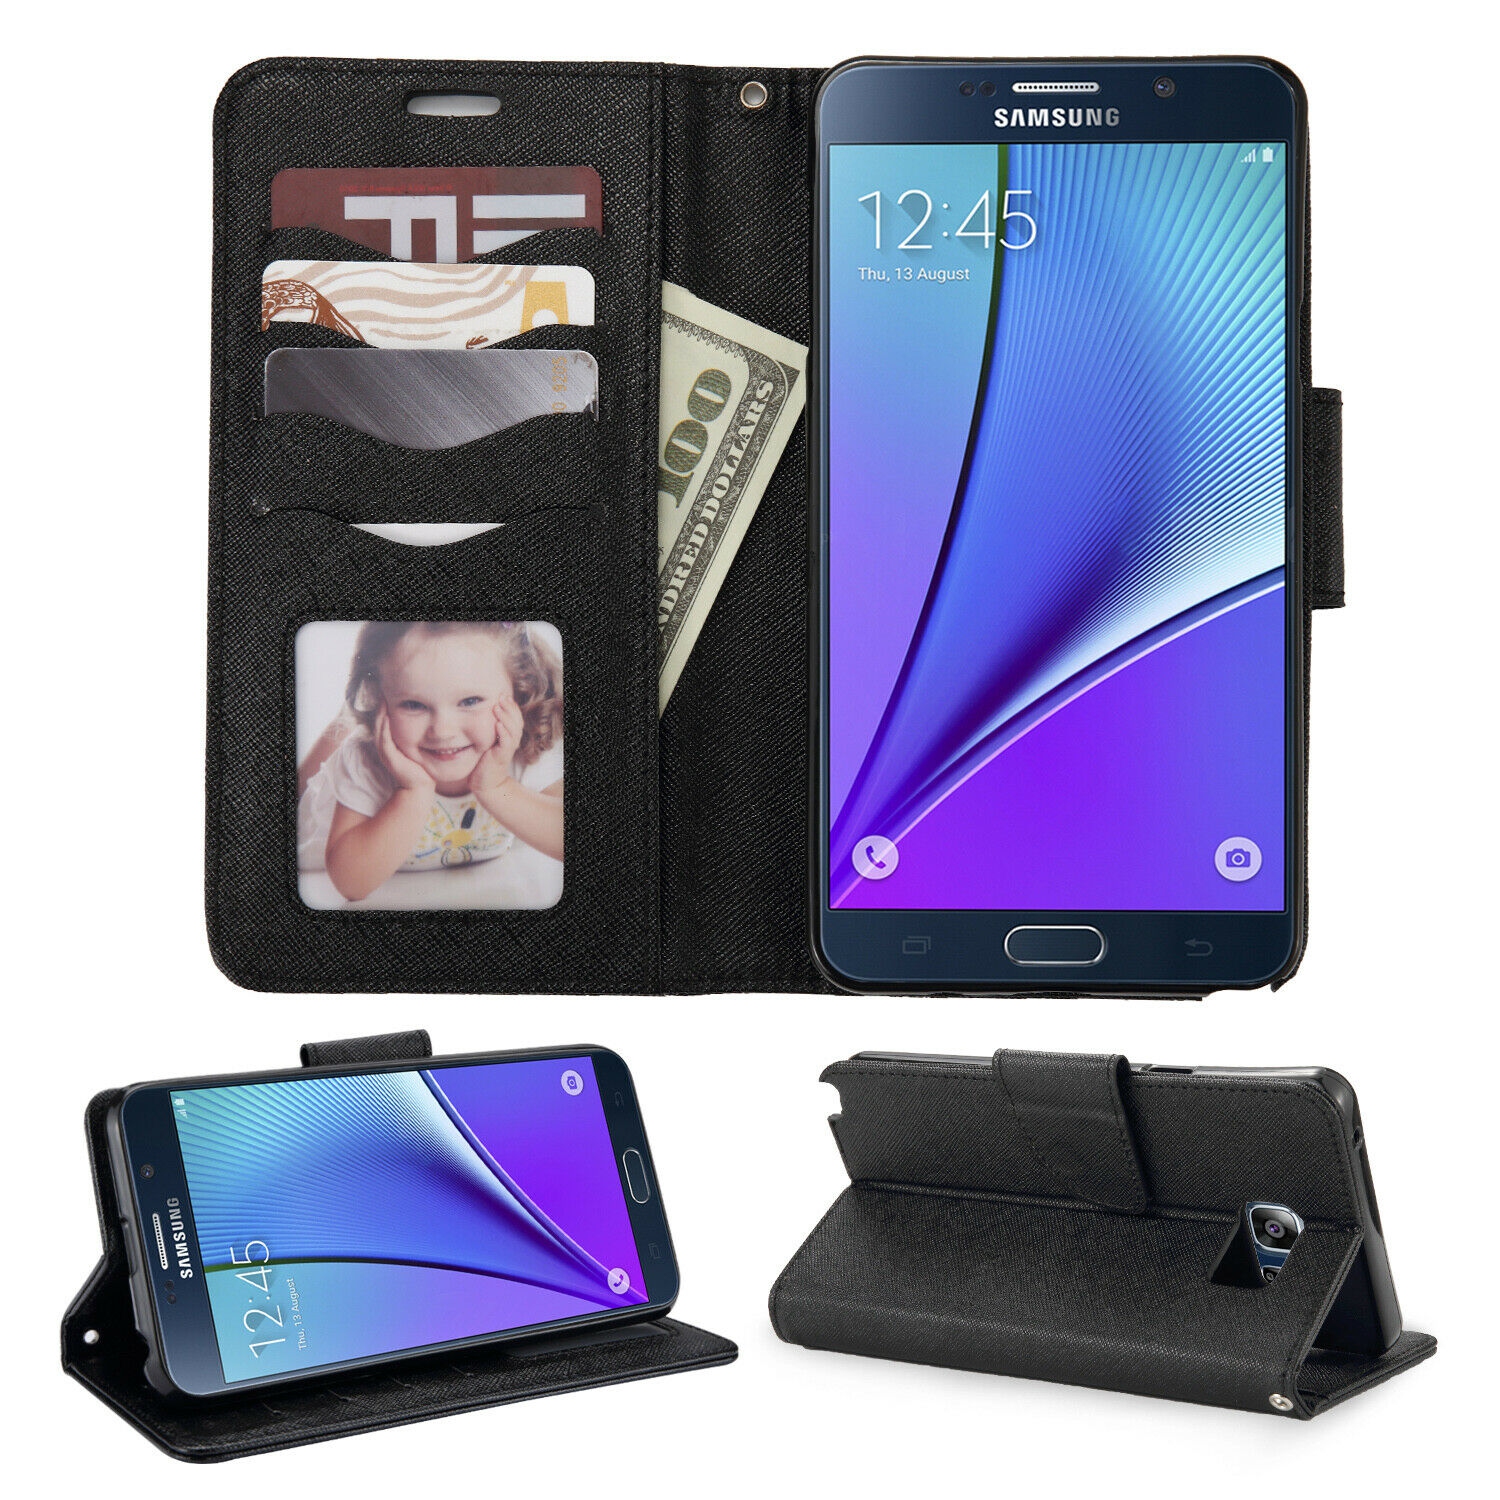 【CSmart】 Magnetic Card Slot Leather Folio Wallet Flip Case Cover for Samsung Galaxy Note 5, Black